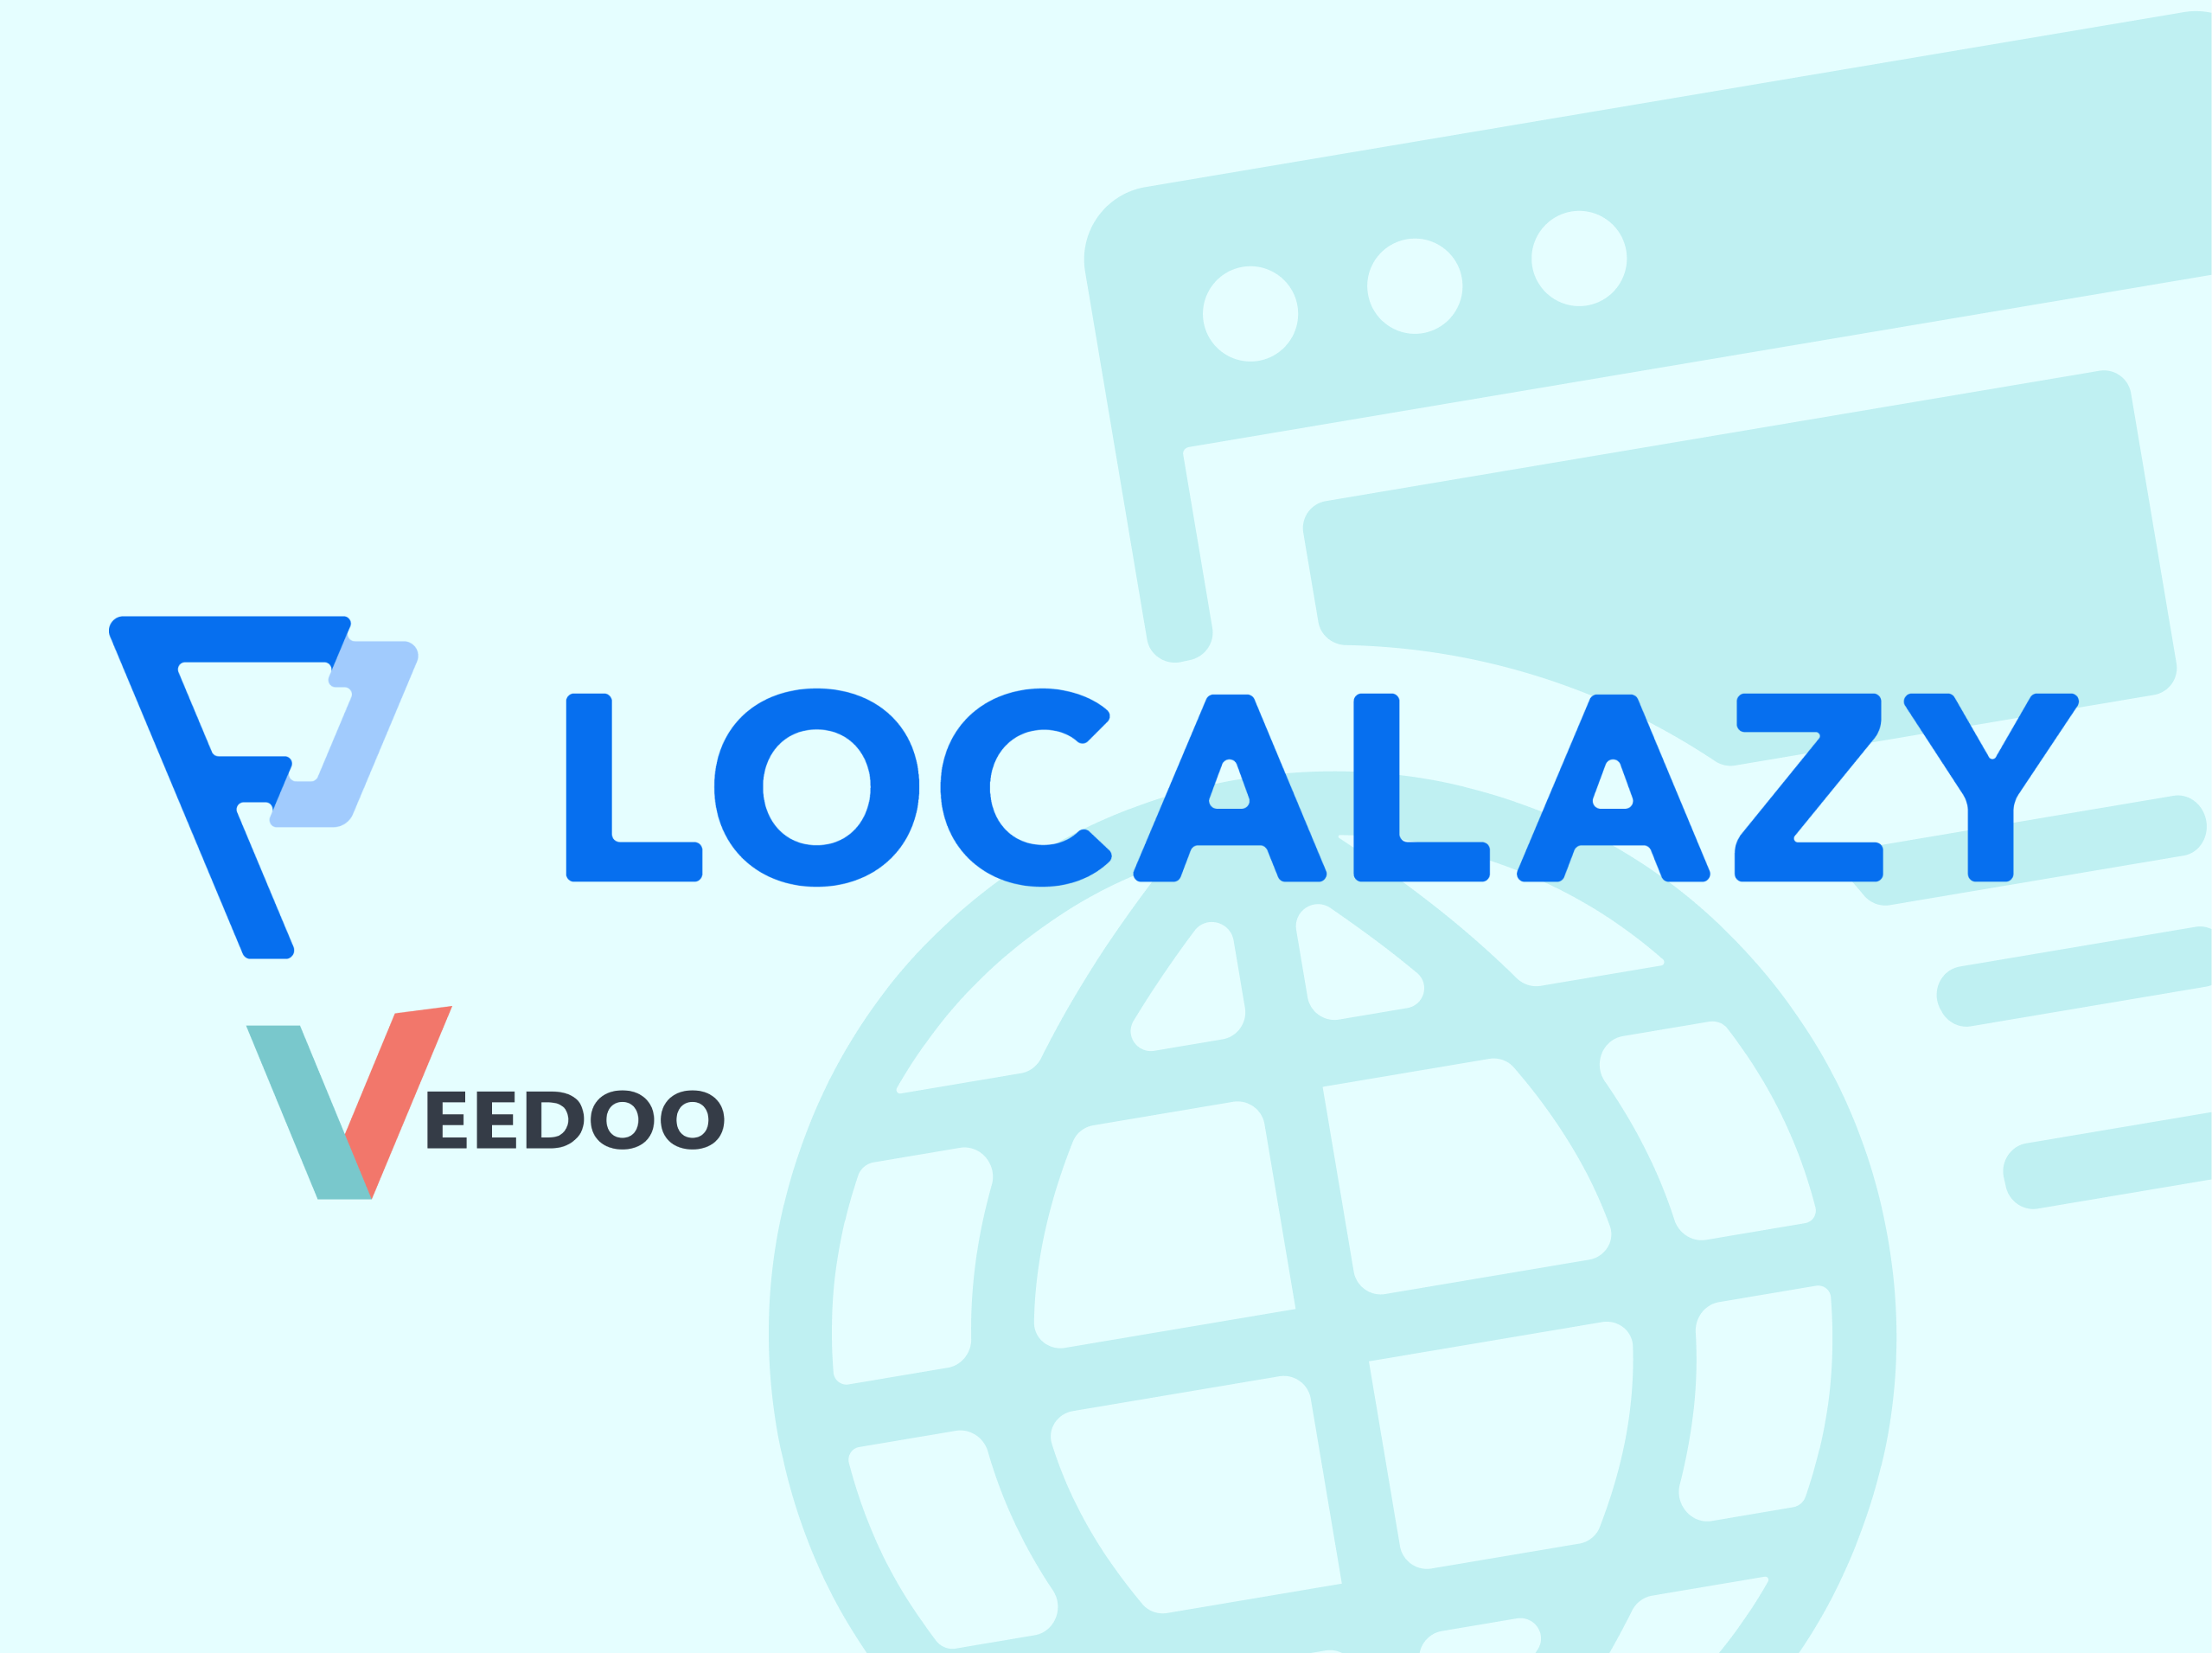 In the picture - Localazy and Veedoo logo